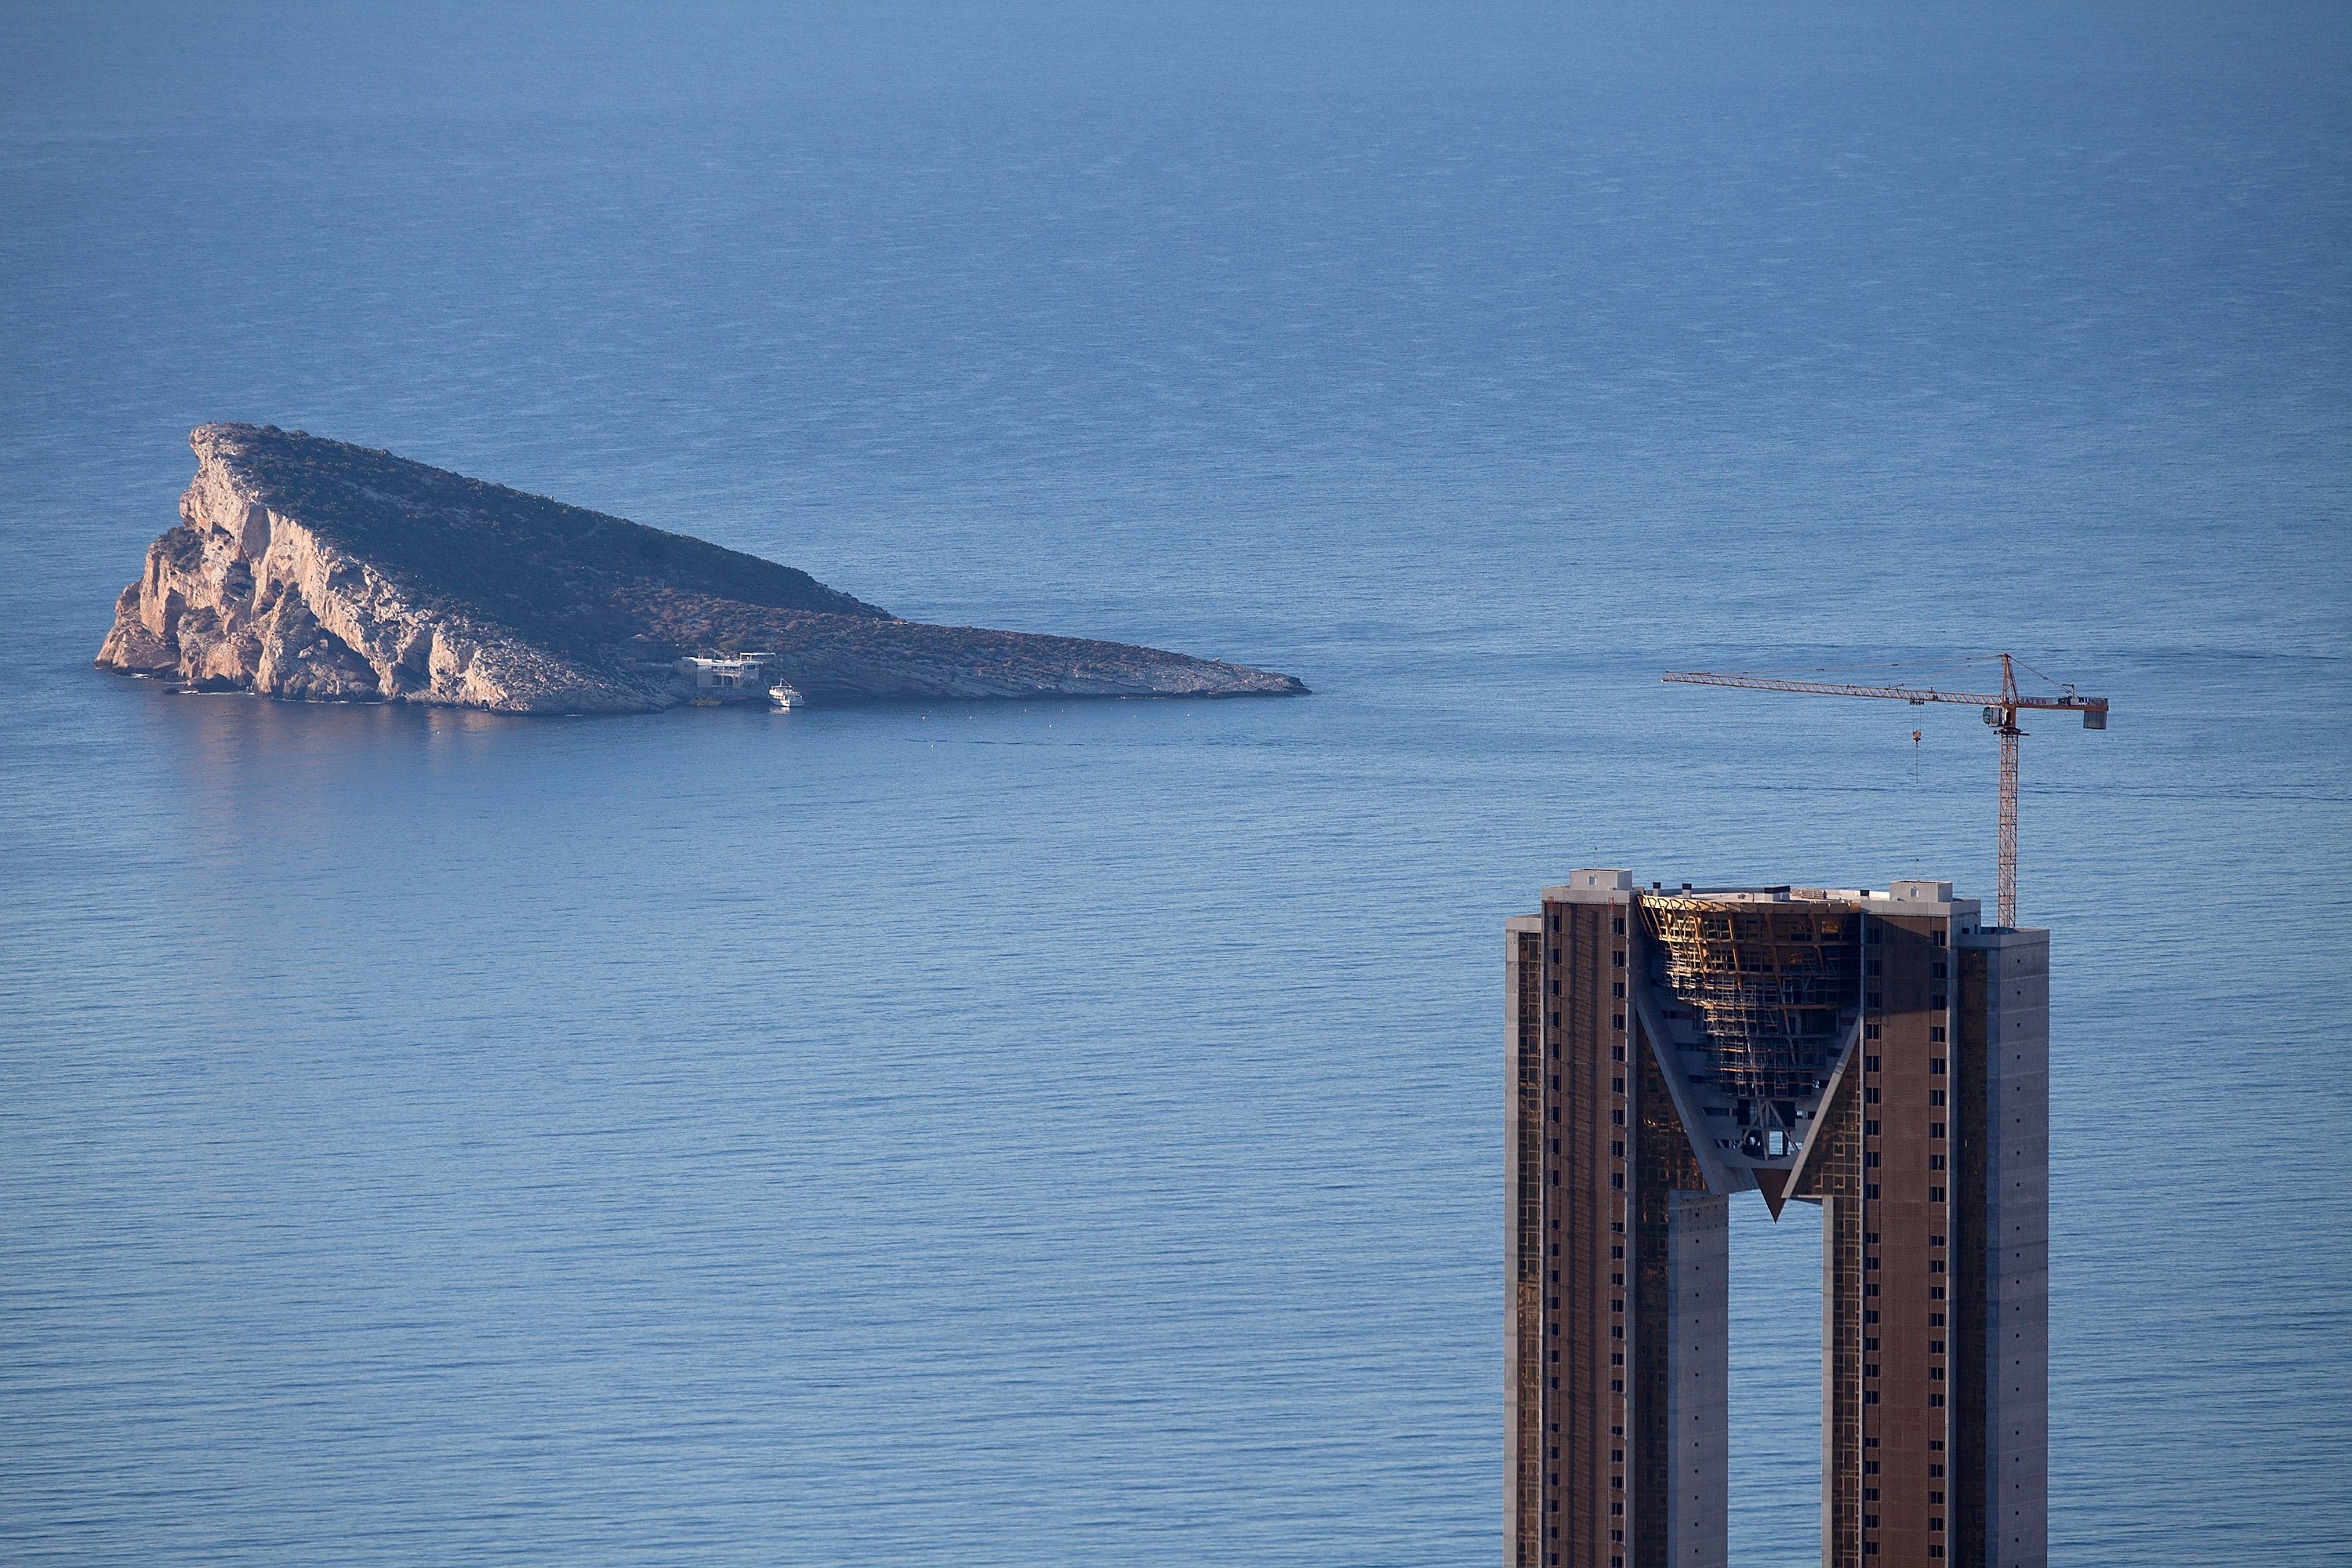 The InTempo Towers In Benidorm Remain Half Built Due To The Faltering Spanish Economy